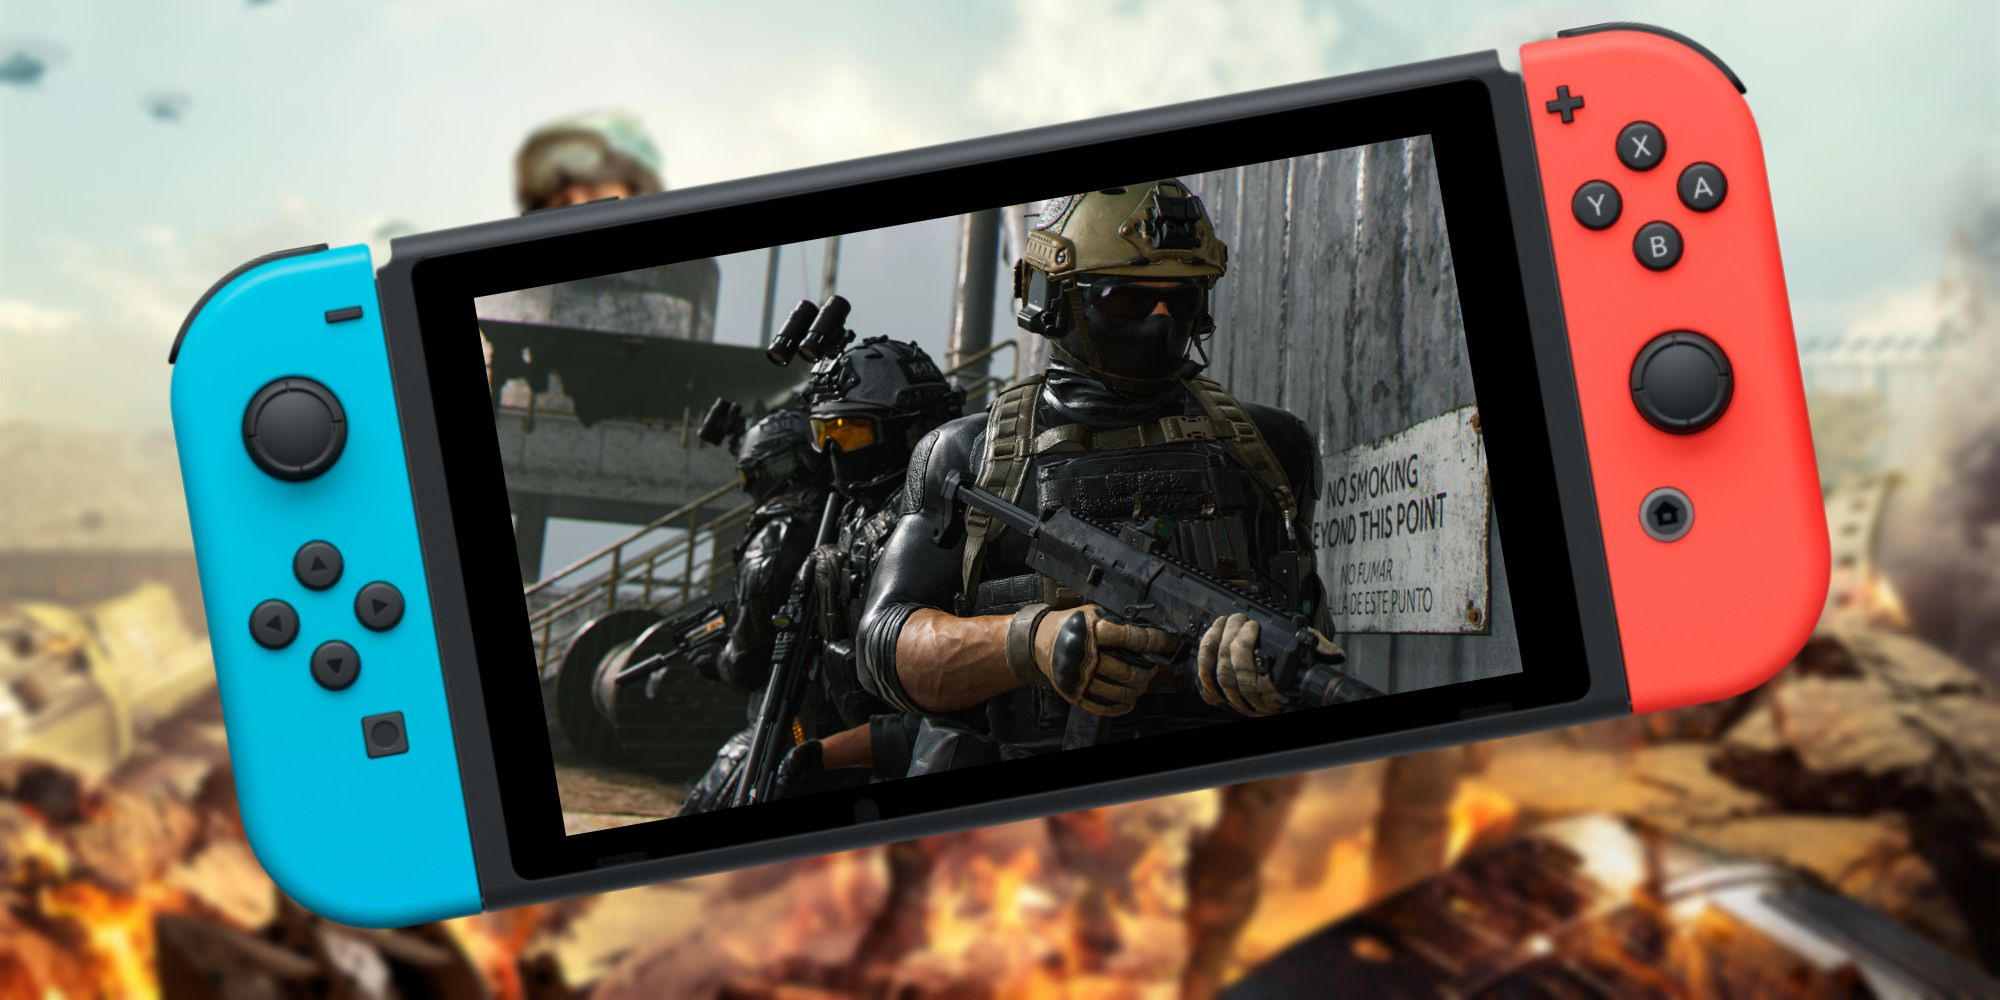 Call of Duty on a Nintendo Switch